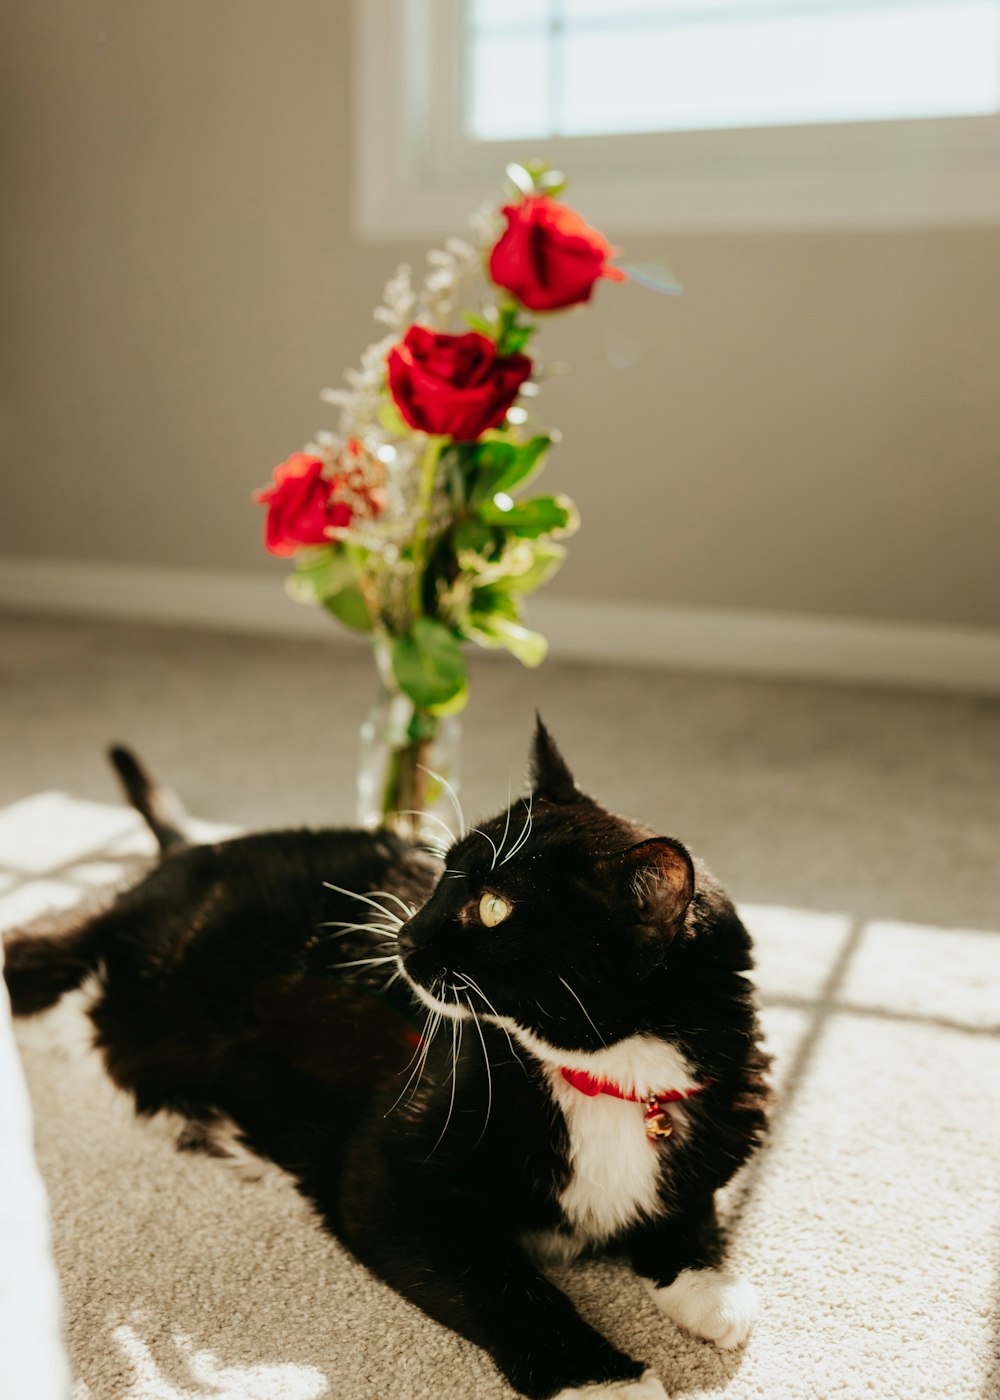 a black and white cat laying on the floor next to a vase with red roses